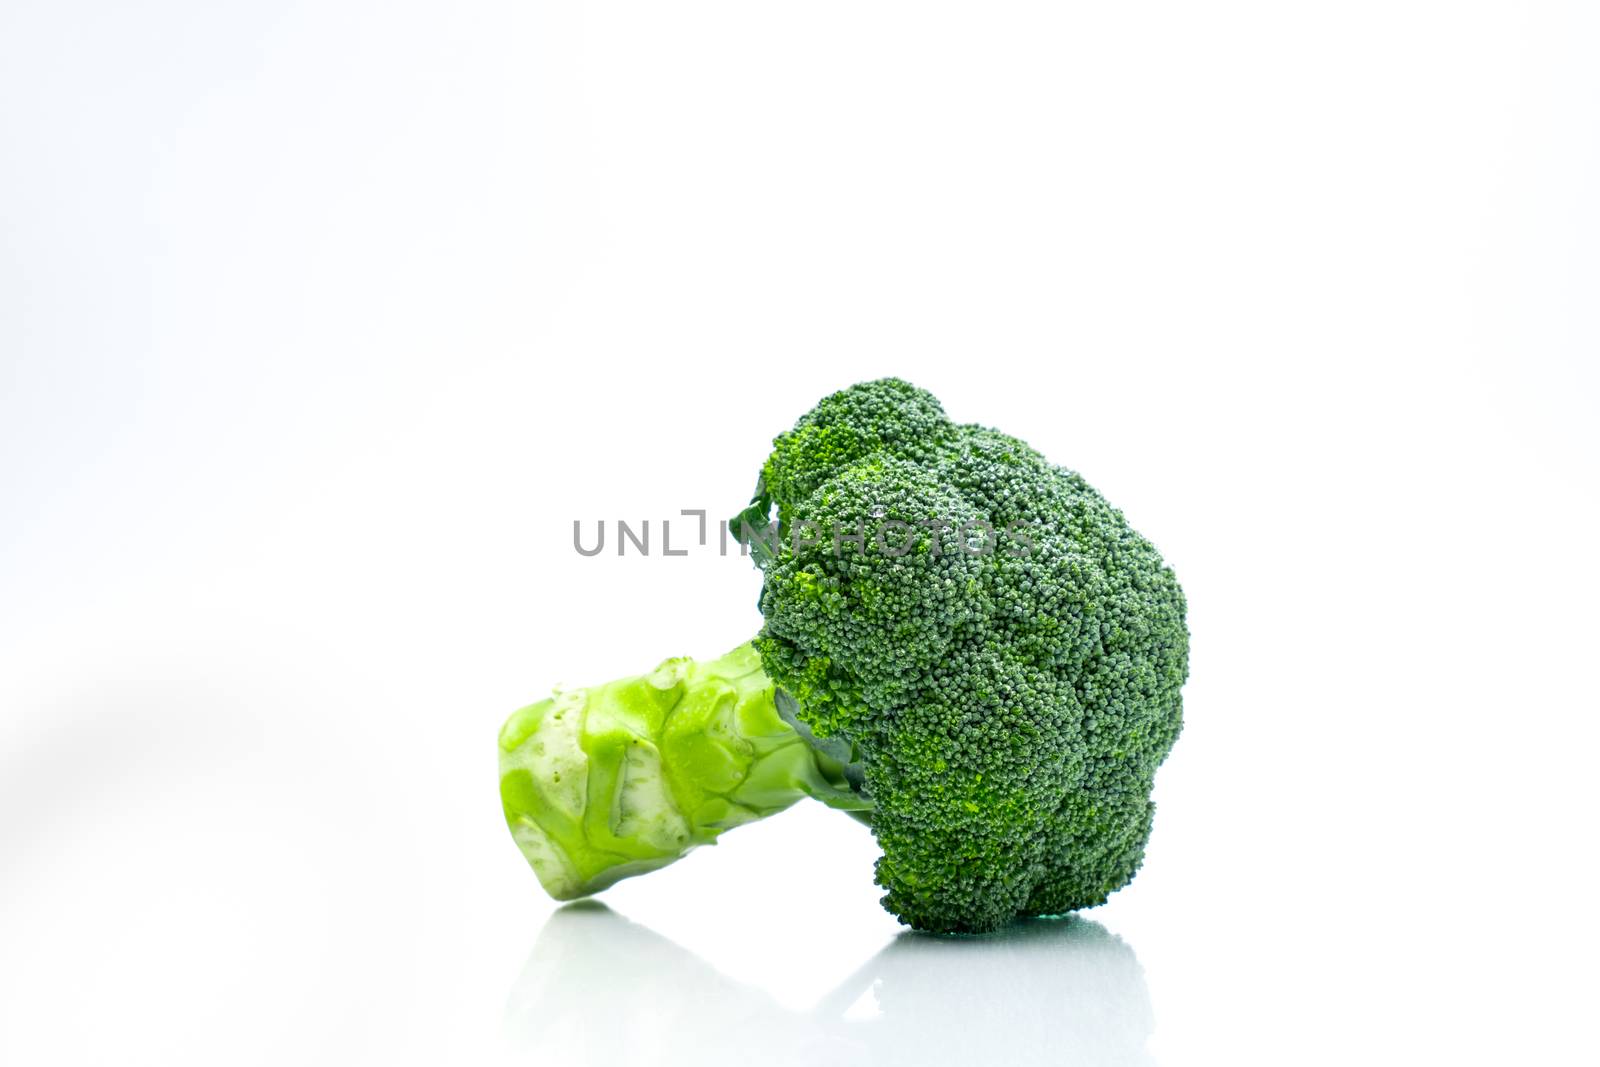 Green broccoli (Brassica oleracea). Vegetables natural source of betacarotene, vitamin c, vitamin k, fiber food, folate. Fresh broccoli cabbage isolated on white background with copy space. by Fahroni